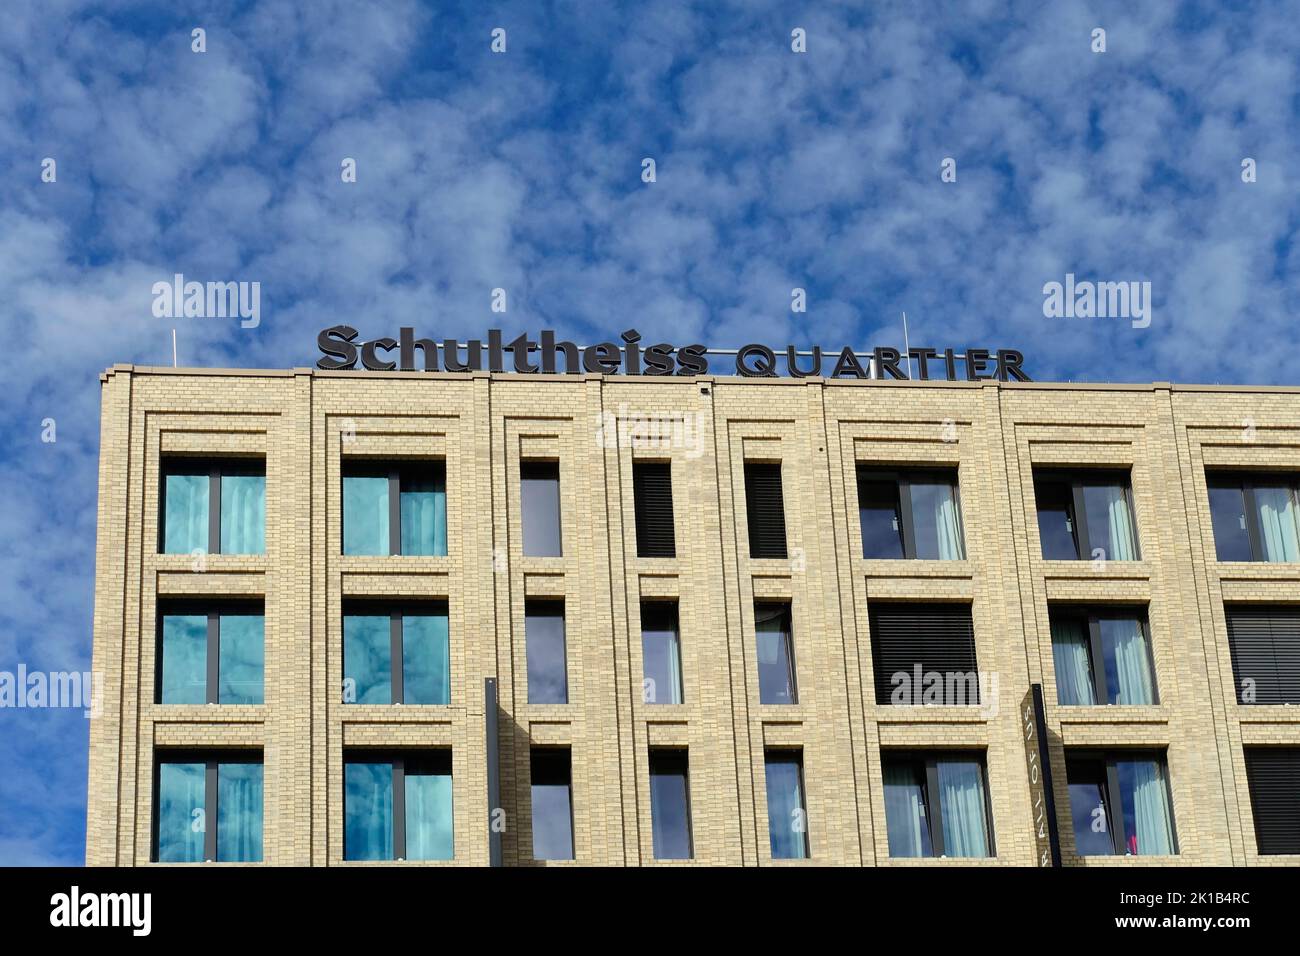 Schultheiss Quartier in Moabit, Berlin, Germany Stock Photo